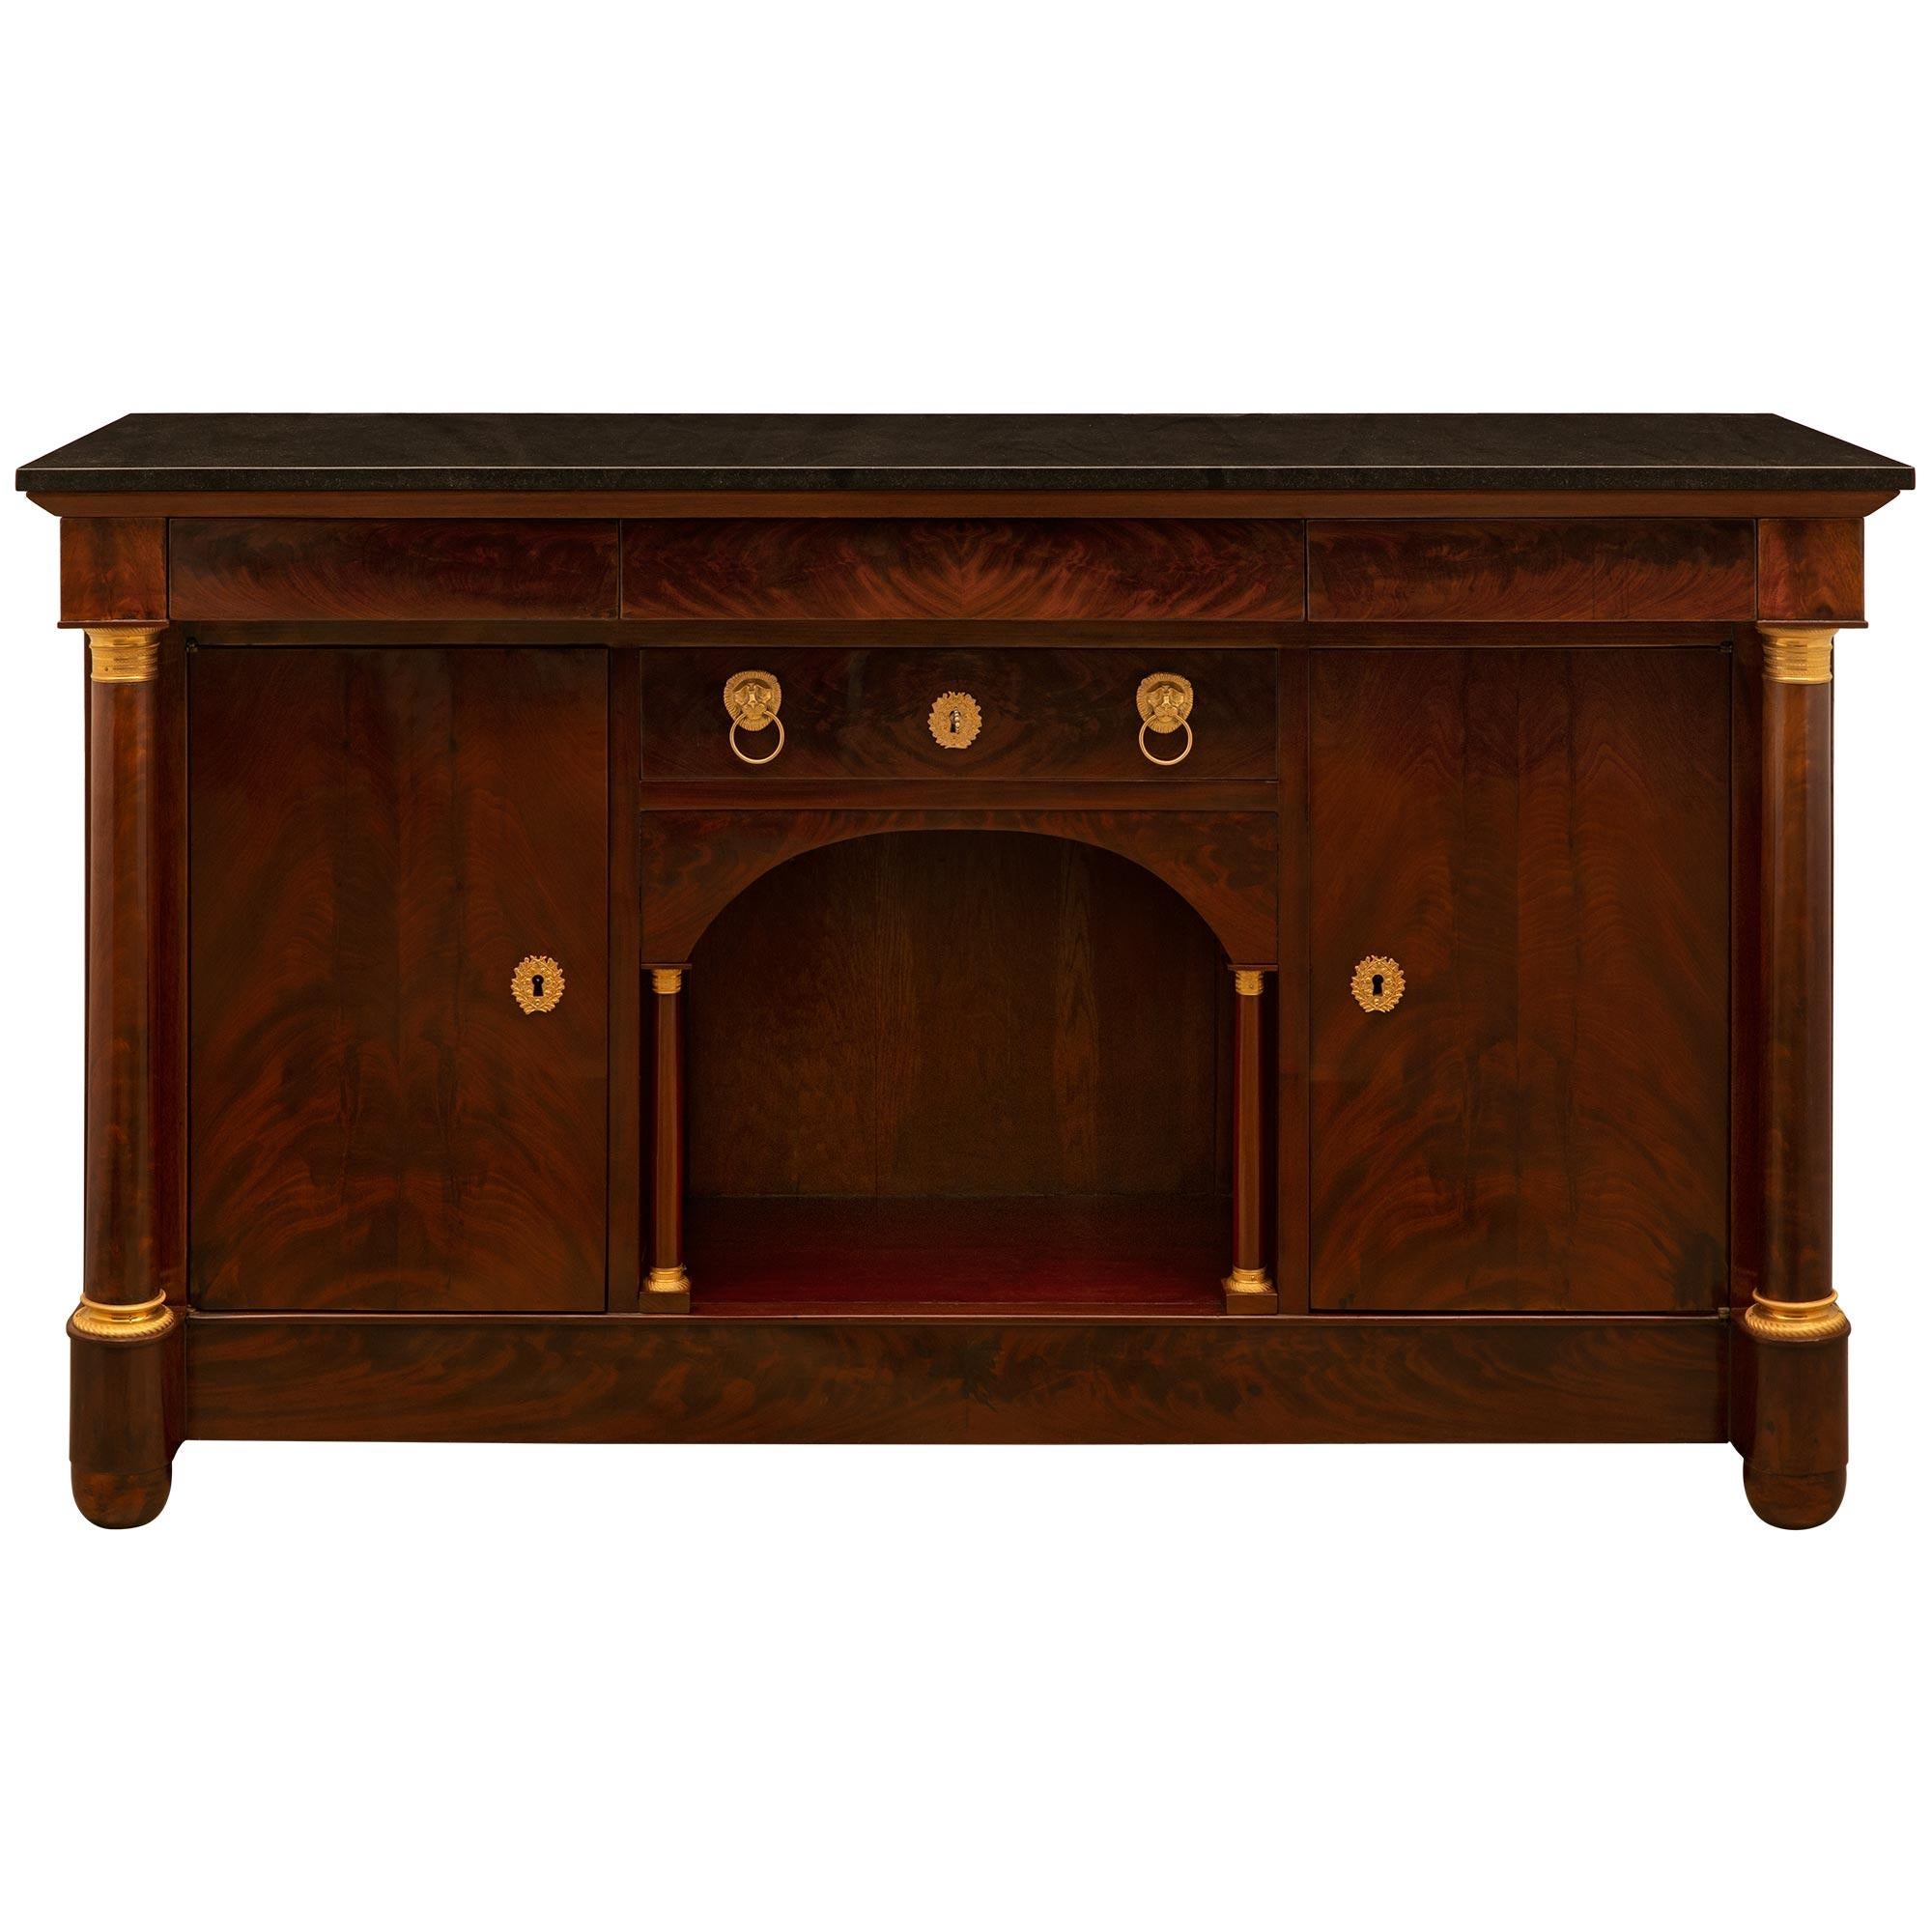 A handsome French 19th century Empire st. Mahogany, Ormolu and marble buffet/cabinet. The buffet is raised on two half round front and two back block supports below the straight apron flanked by circular columns accented with bottom Ormolu plinths